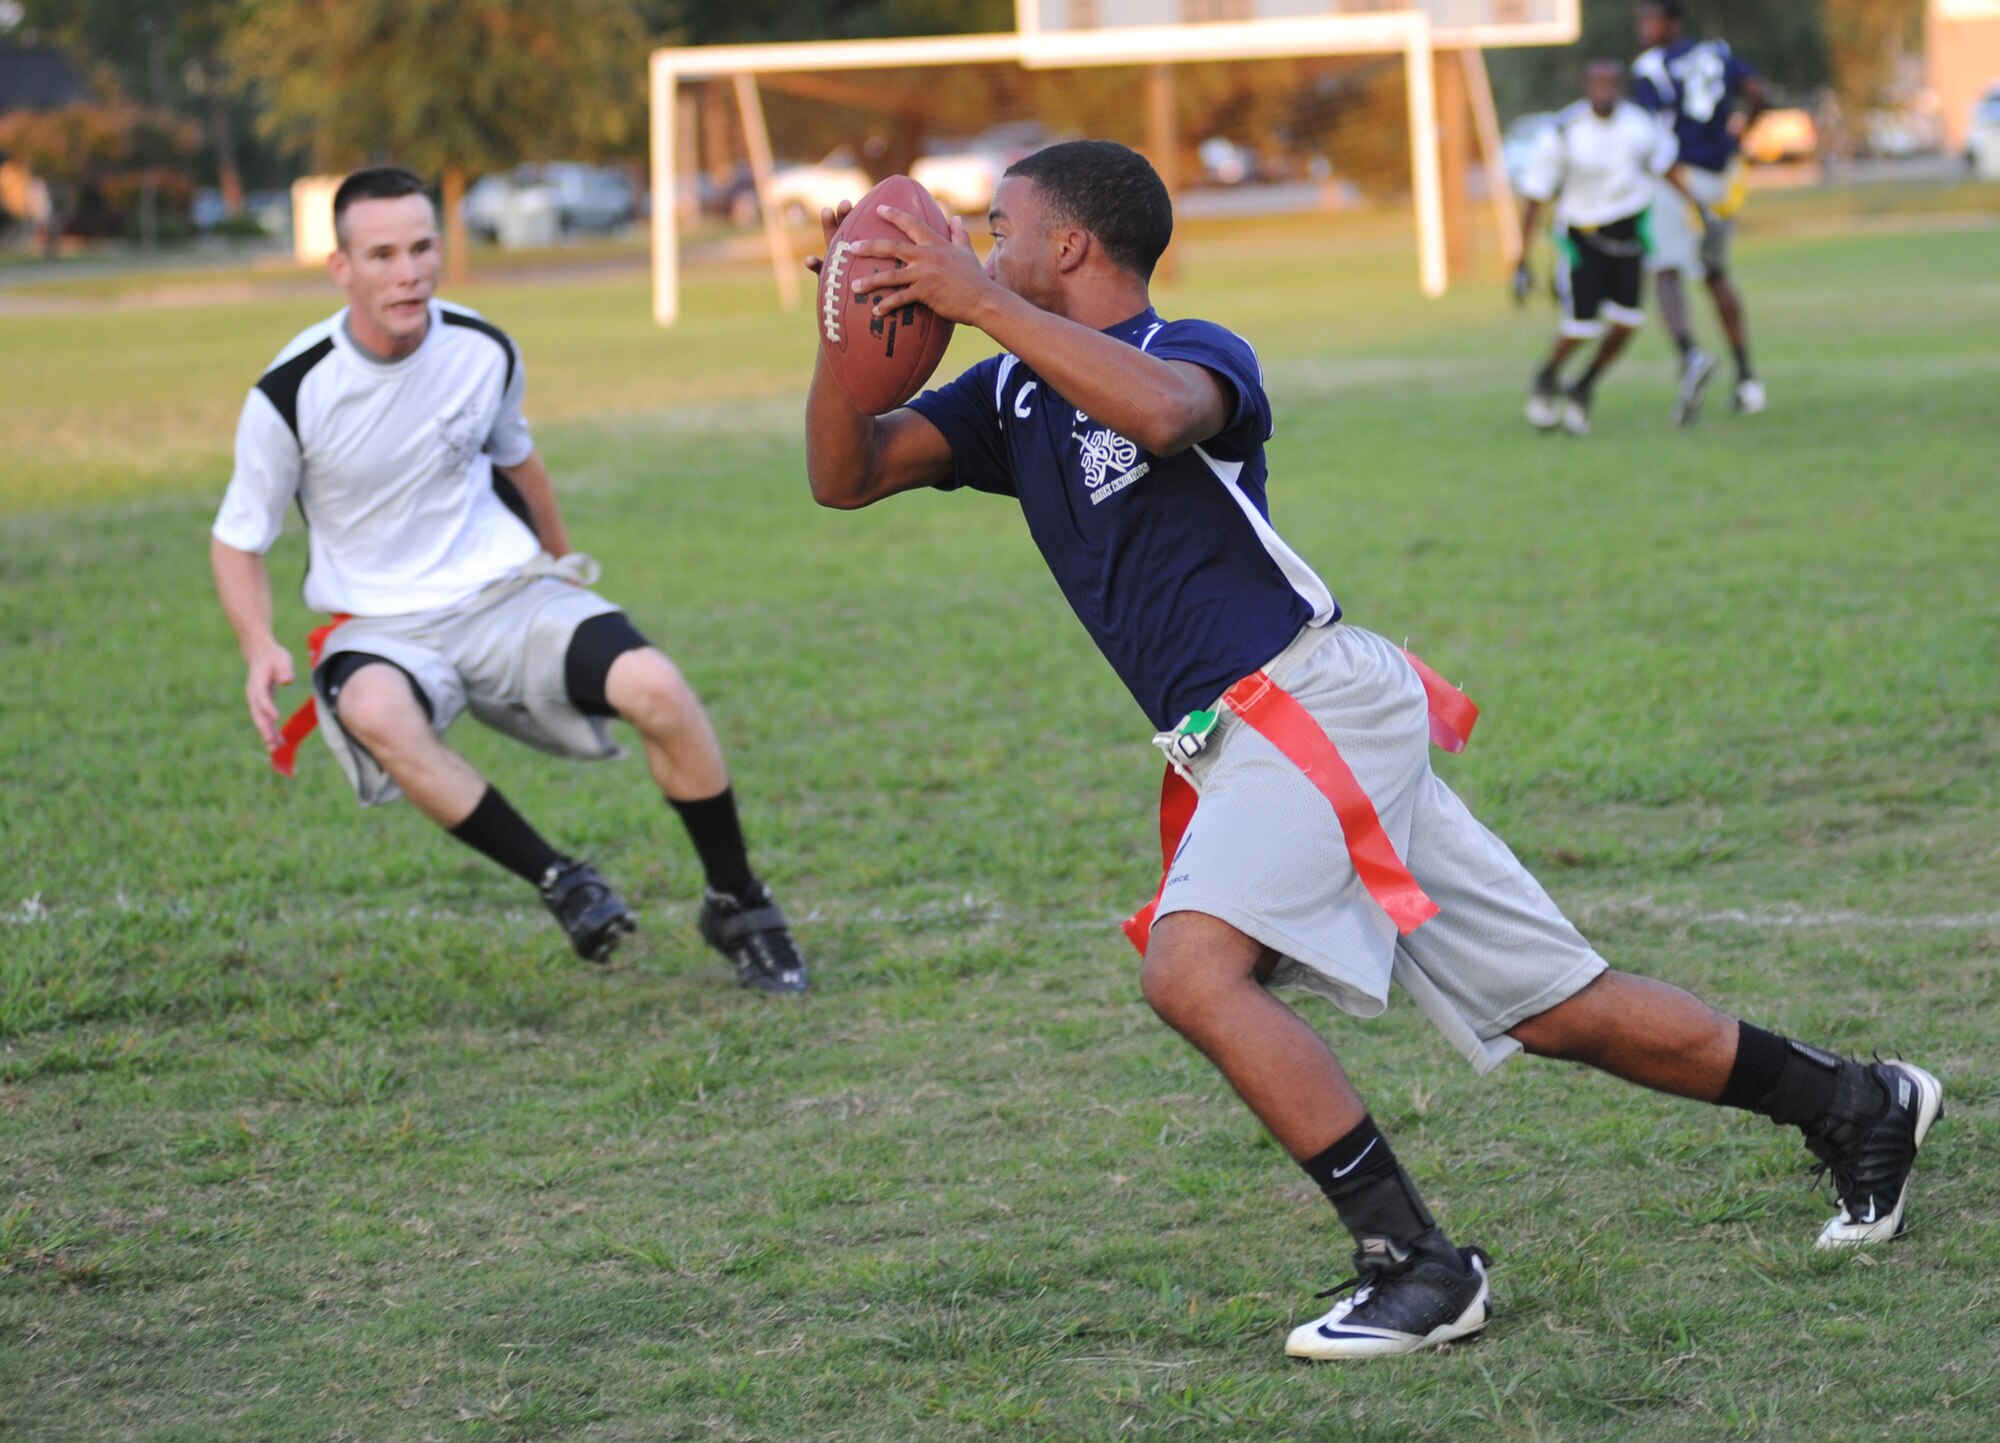 Samuel Davis, 338th Training Squadron-C team, goes on the defense as Aaron Brandon, 338th TRS-B team, catches a pass and heads toward the end zone during a National Conference intramural flag football team Oct. 6 at Keesler Air Force Base, Miss.  The 338th TRS-C posted a 12-6 victory.  (U.S. Air Force photo by Kemberly Groue)